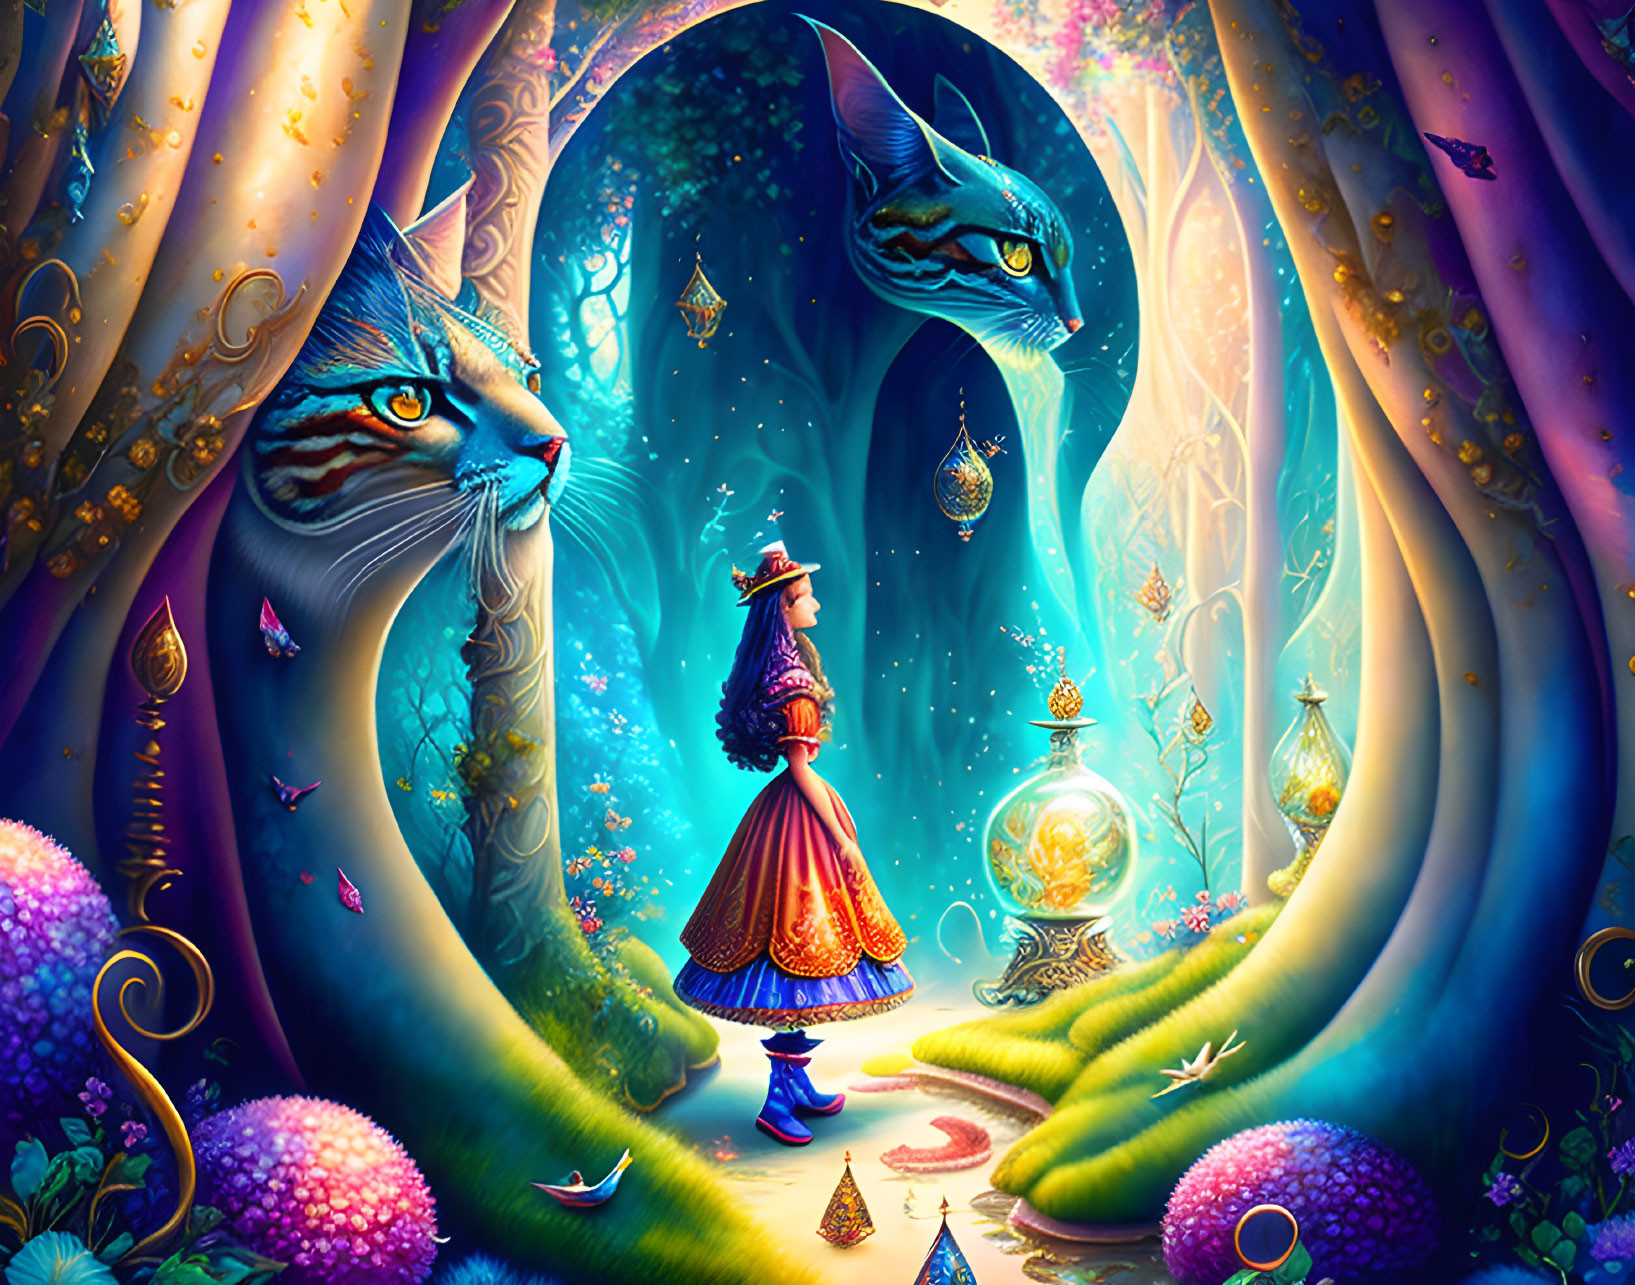 Fantastical artwork: Person in purple cloak in magical forest with giant blue cats